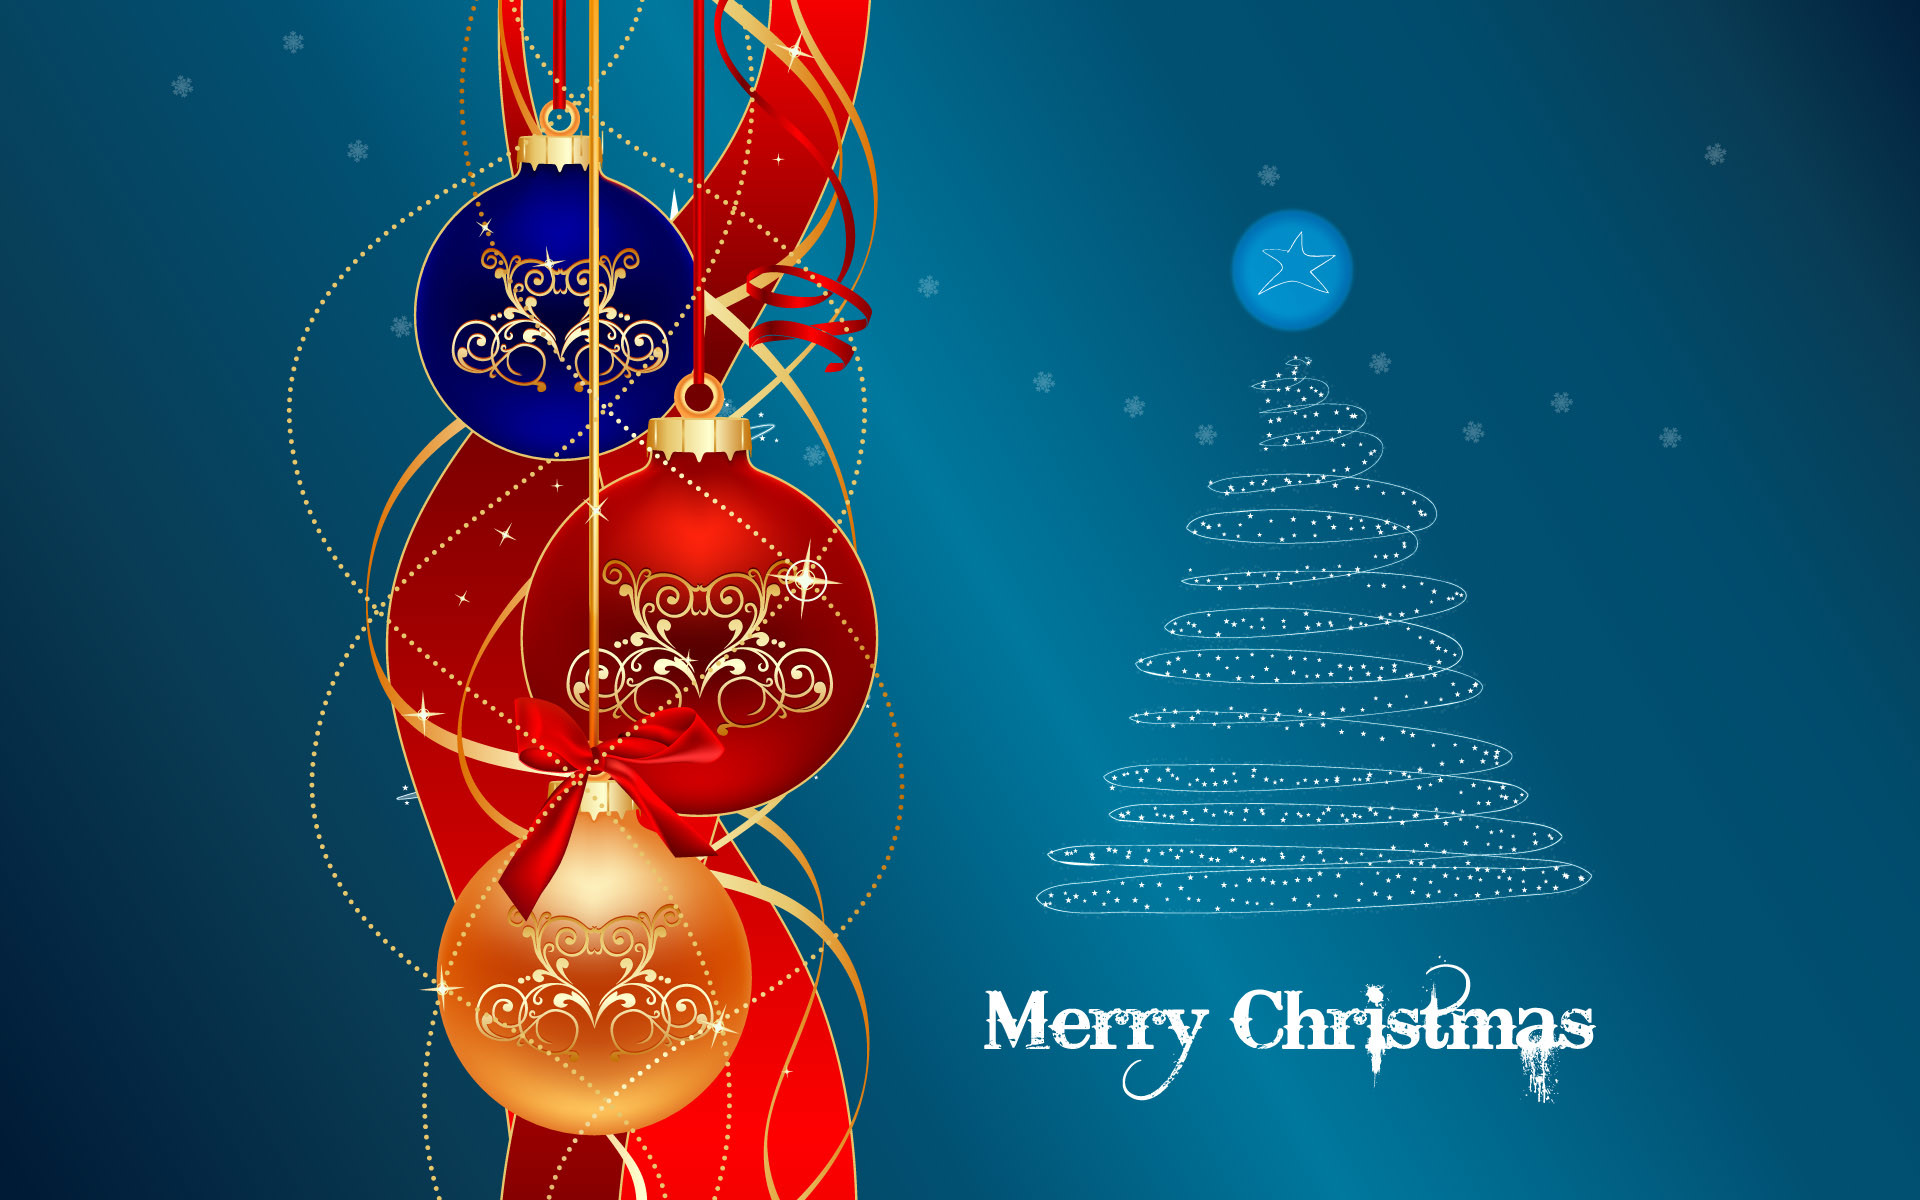 20 Merry Christmas Images Wallpapers